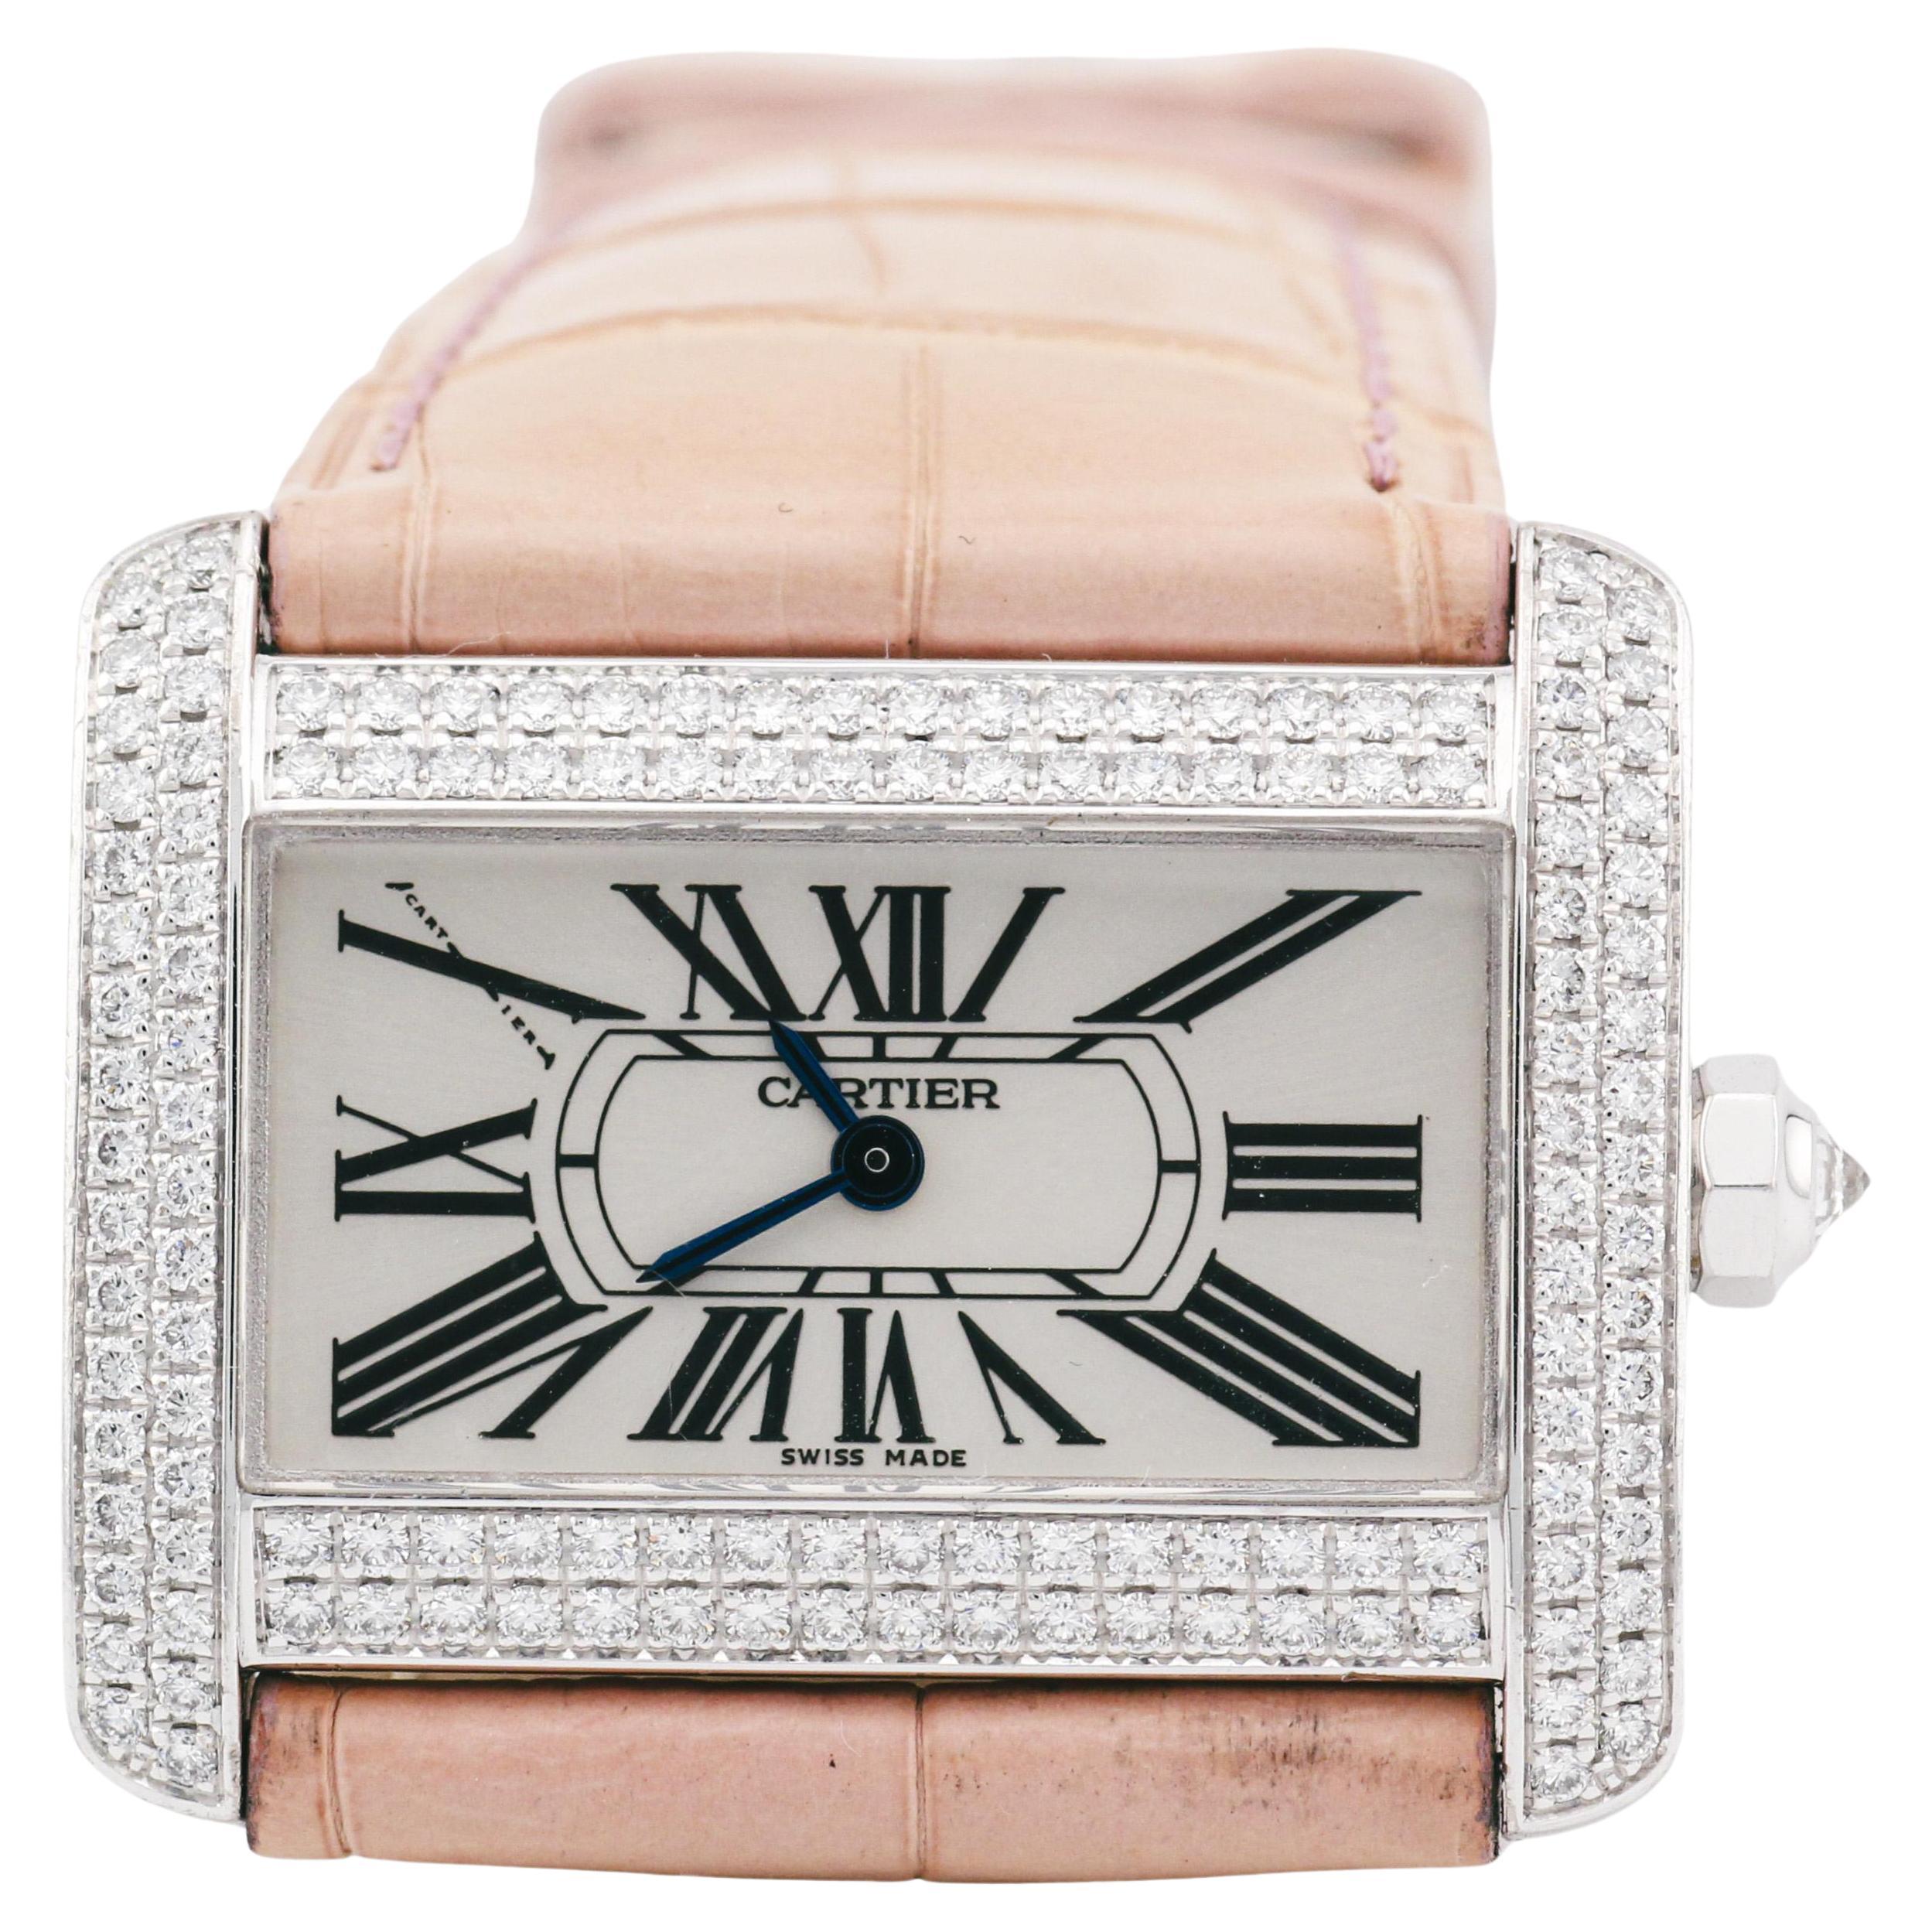 Do Cartier watches need servicing?